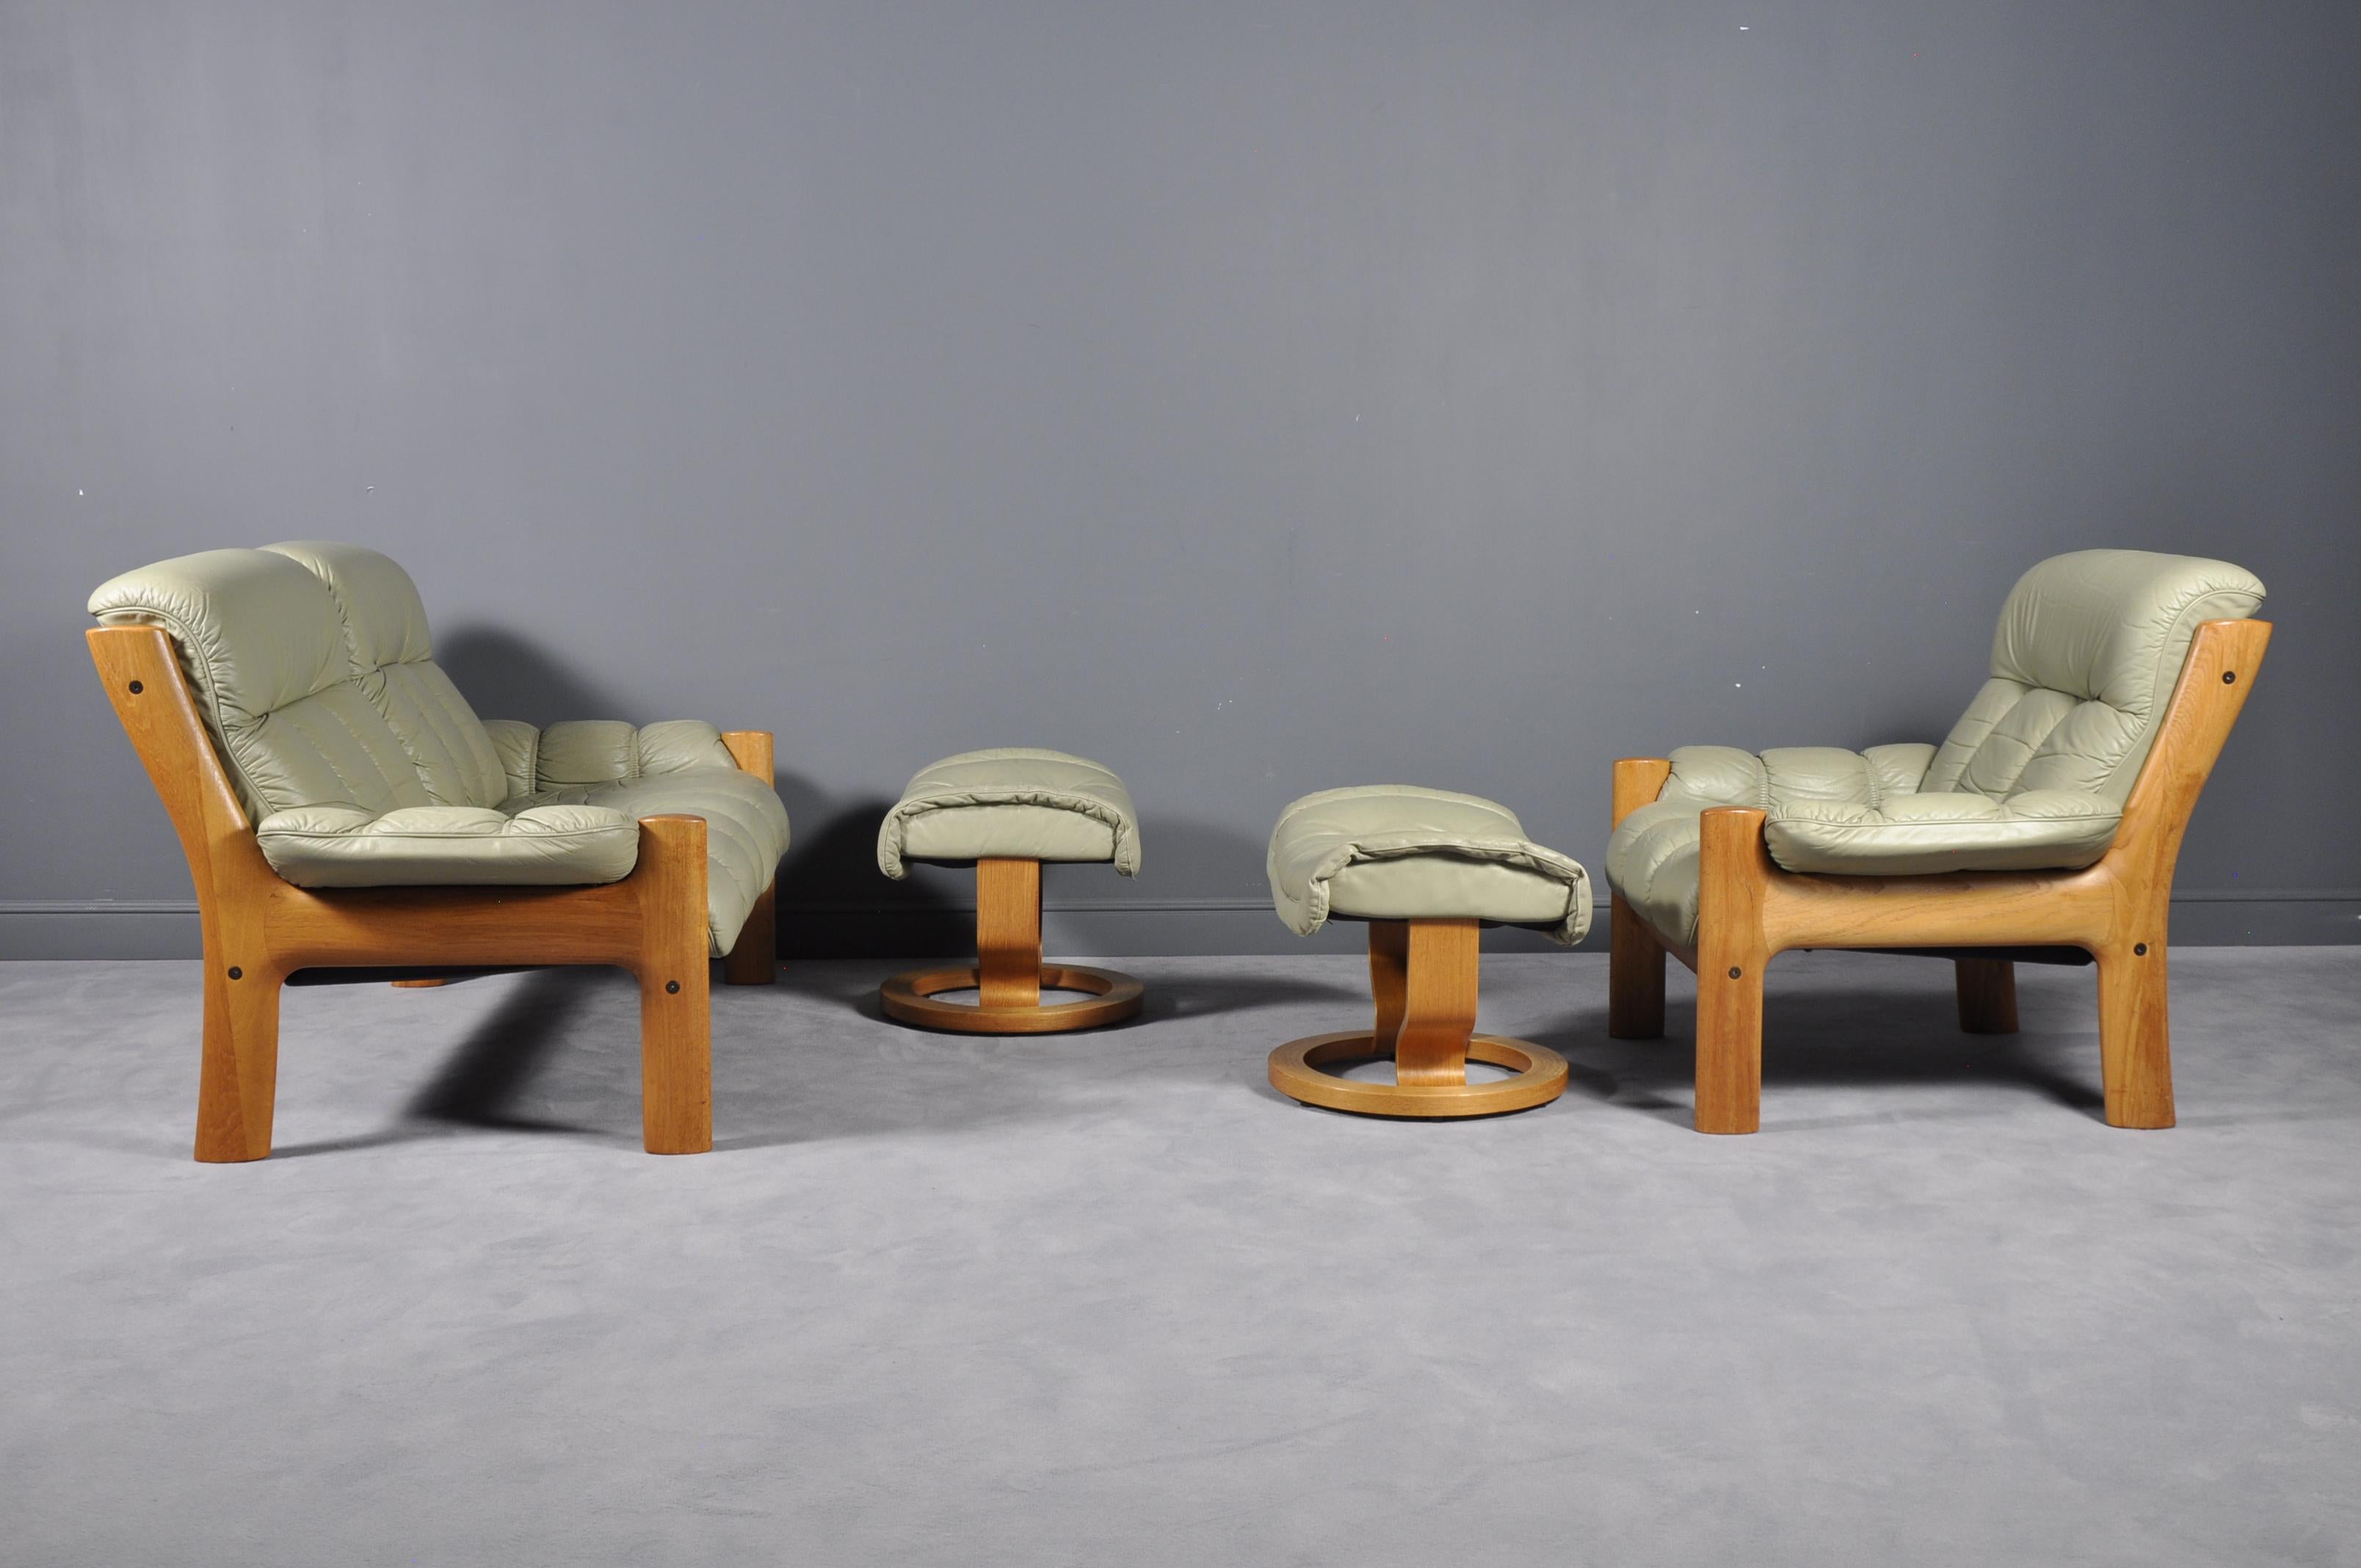 Montana Leather Lounge Chair and Ottoman by J.E. Ekornes, Norway, circa 1970s For Sale 6